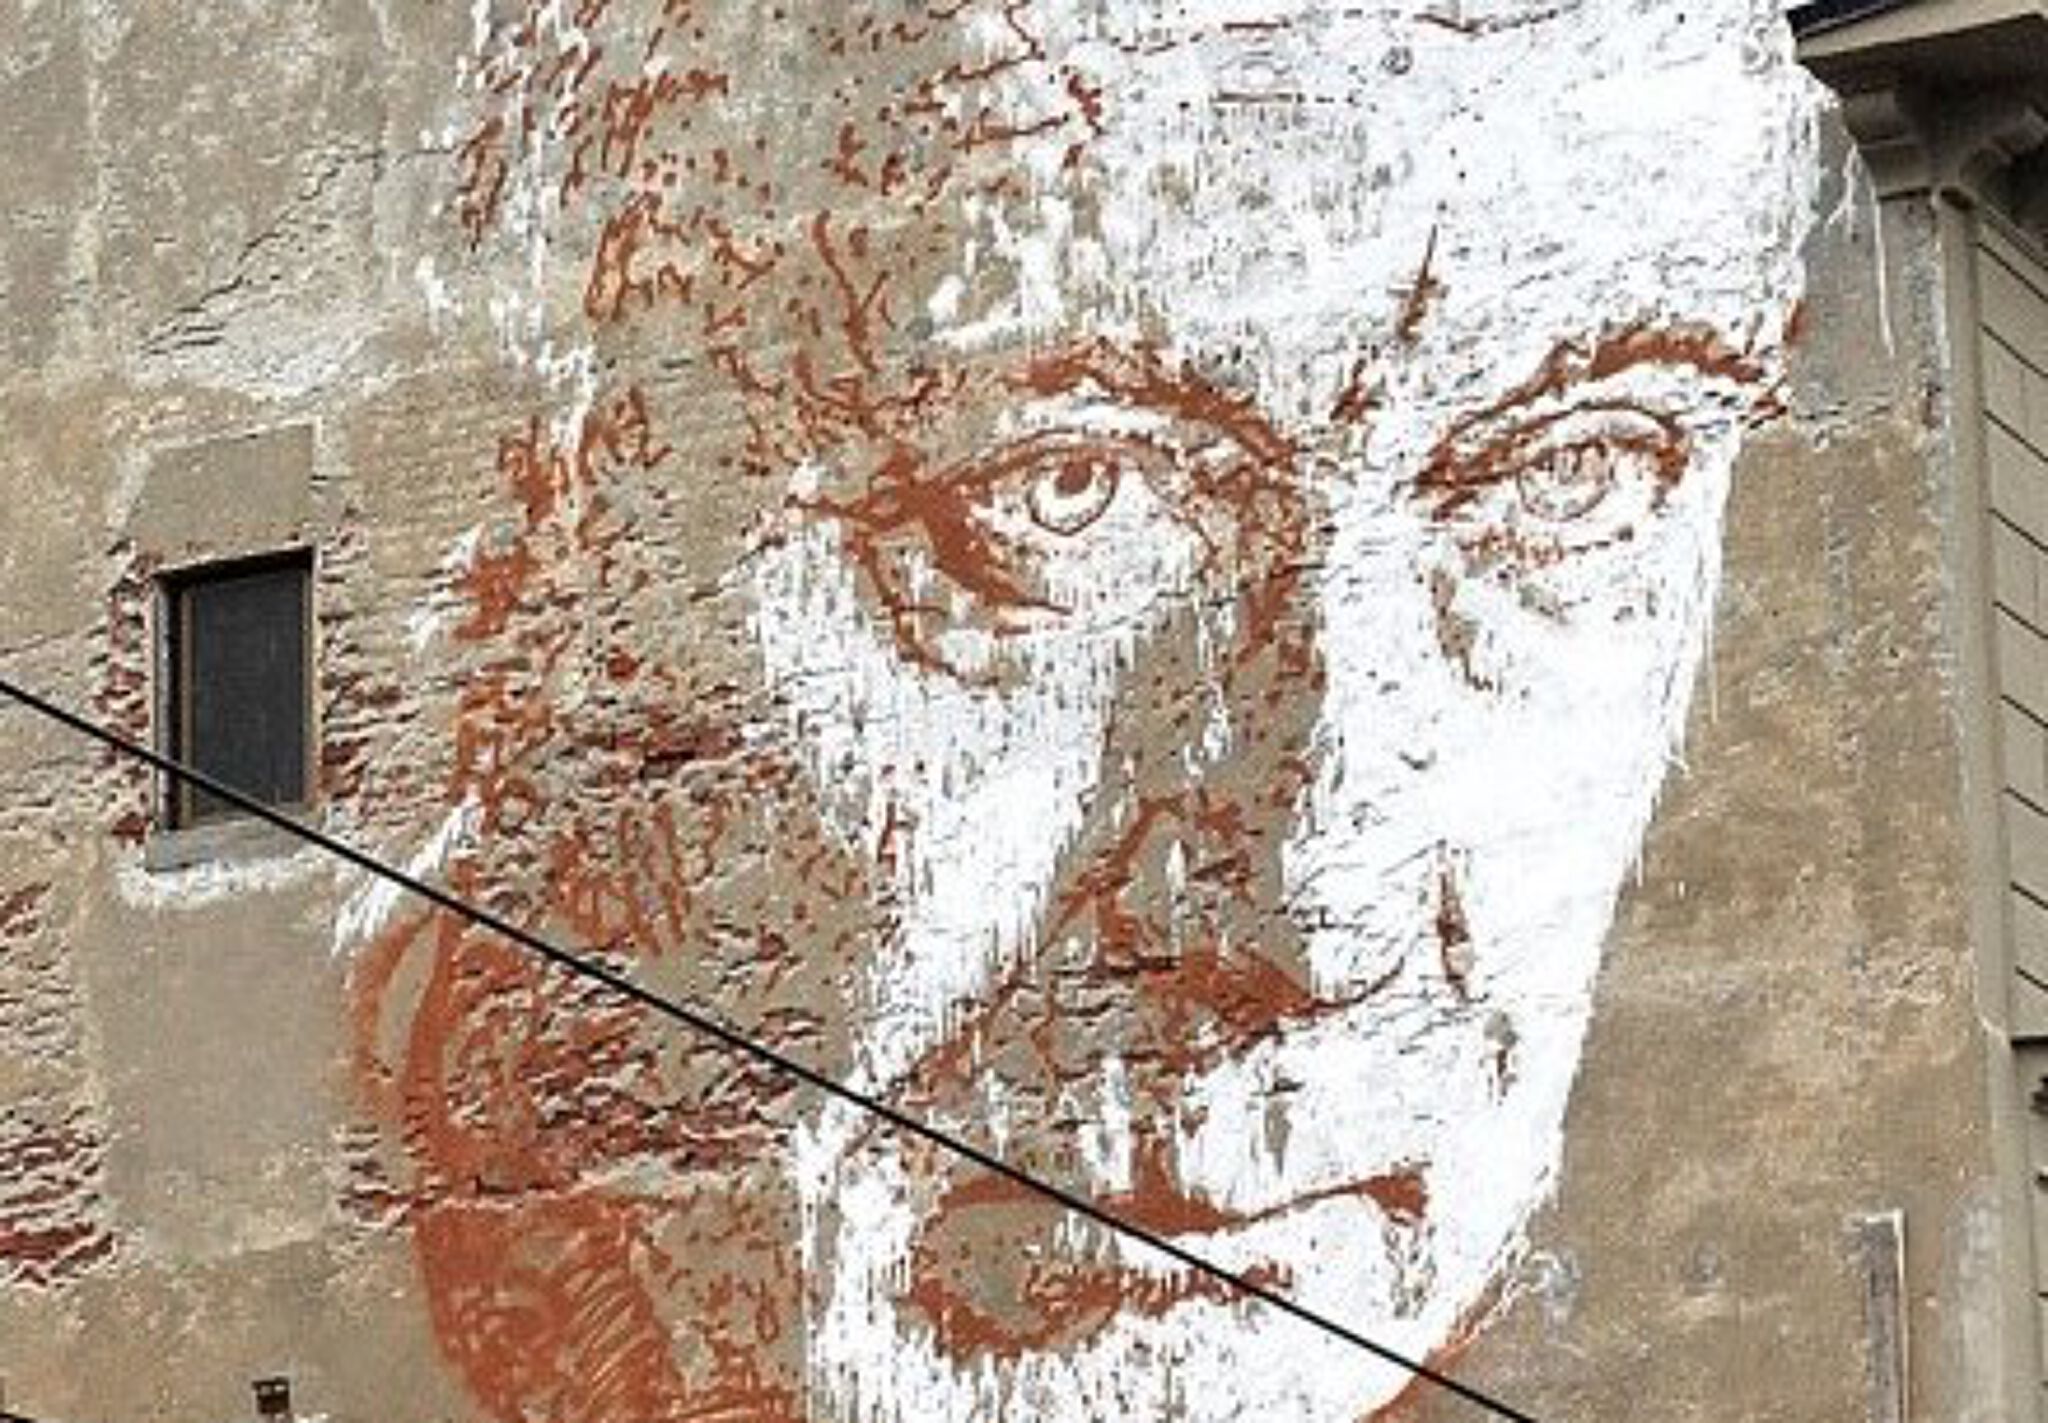 Vhils&mdash;Scratching the surface